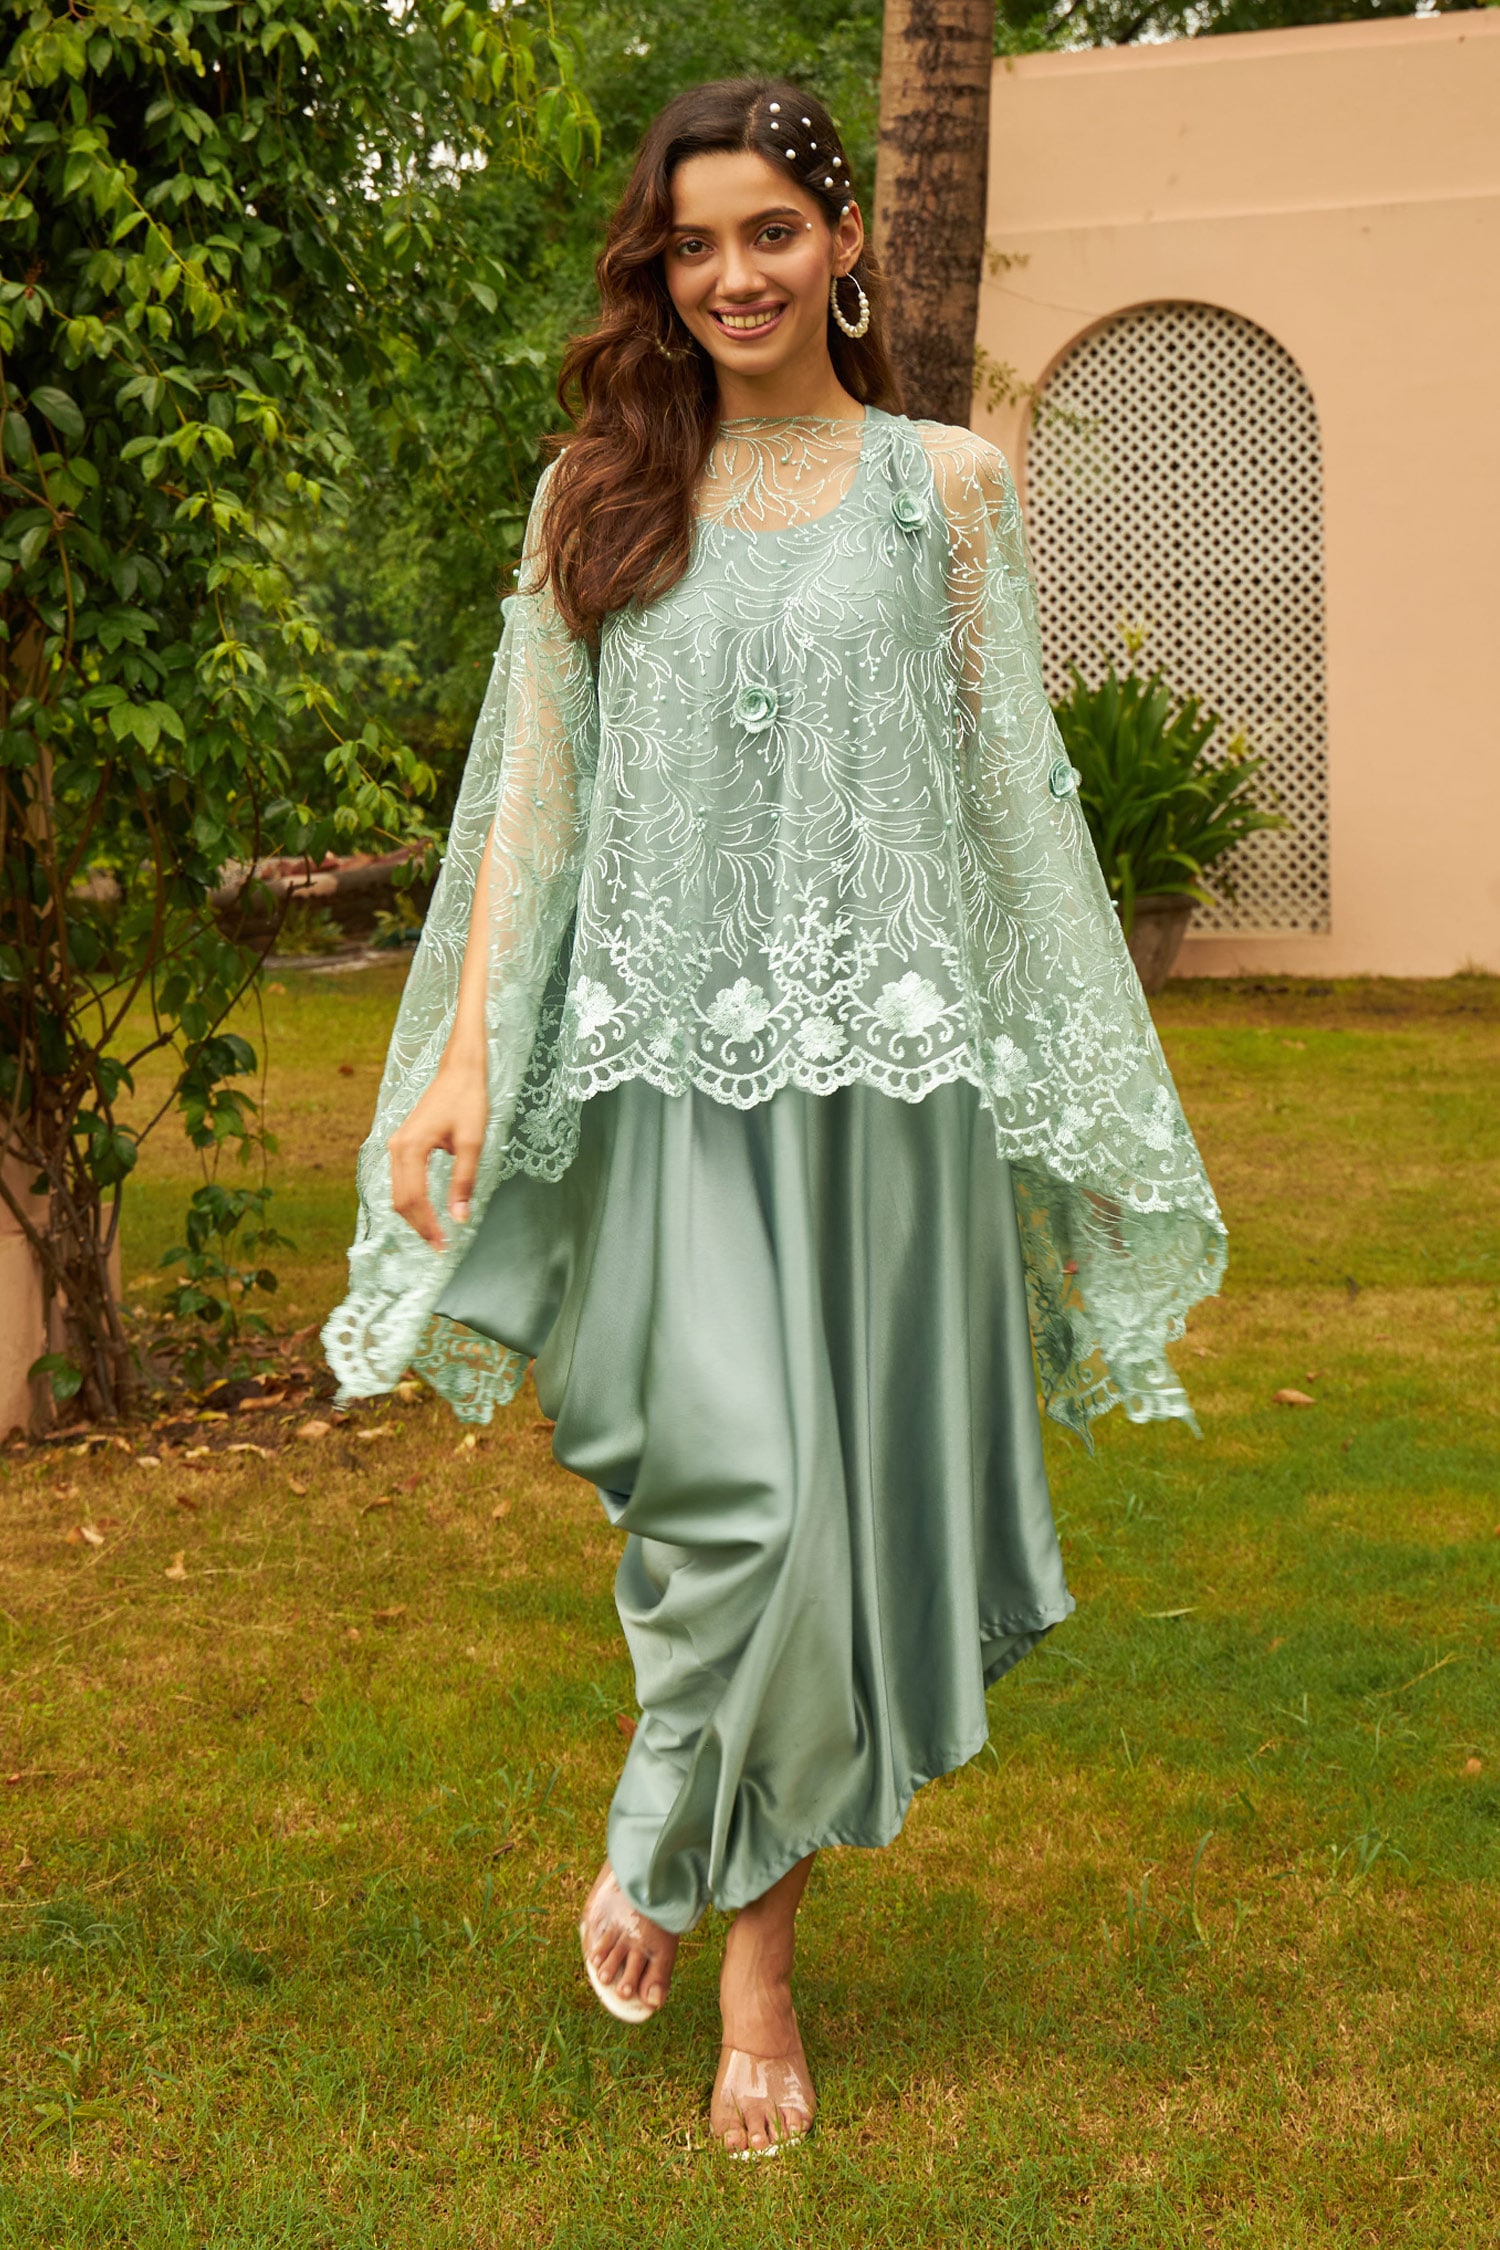 Tasuvure - Women Green Satin Silk Embroidered Floral Applique Embellished With Dress For Women| Aza Fashions| Cocktail,Reception,Party